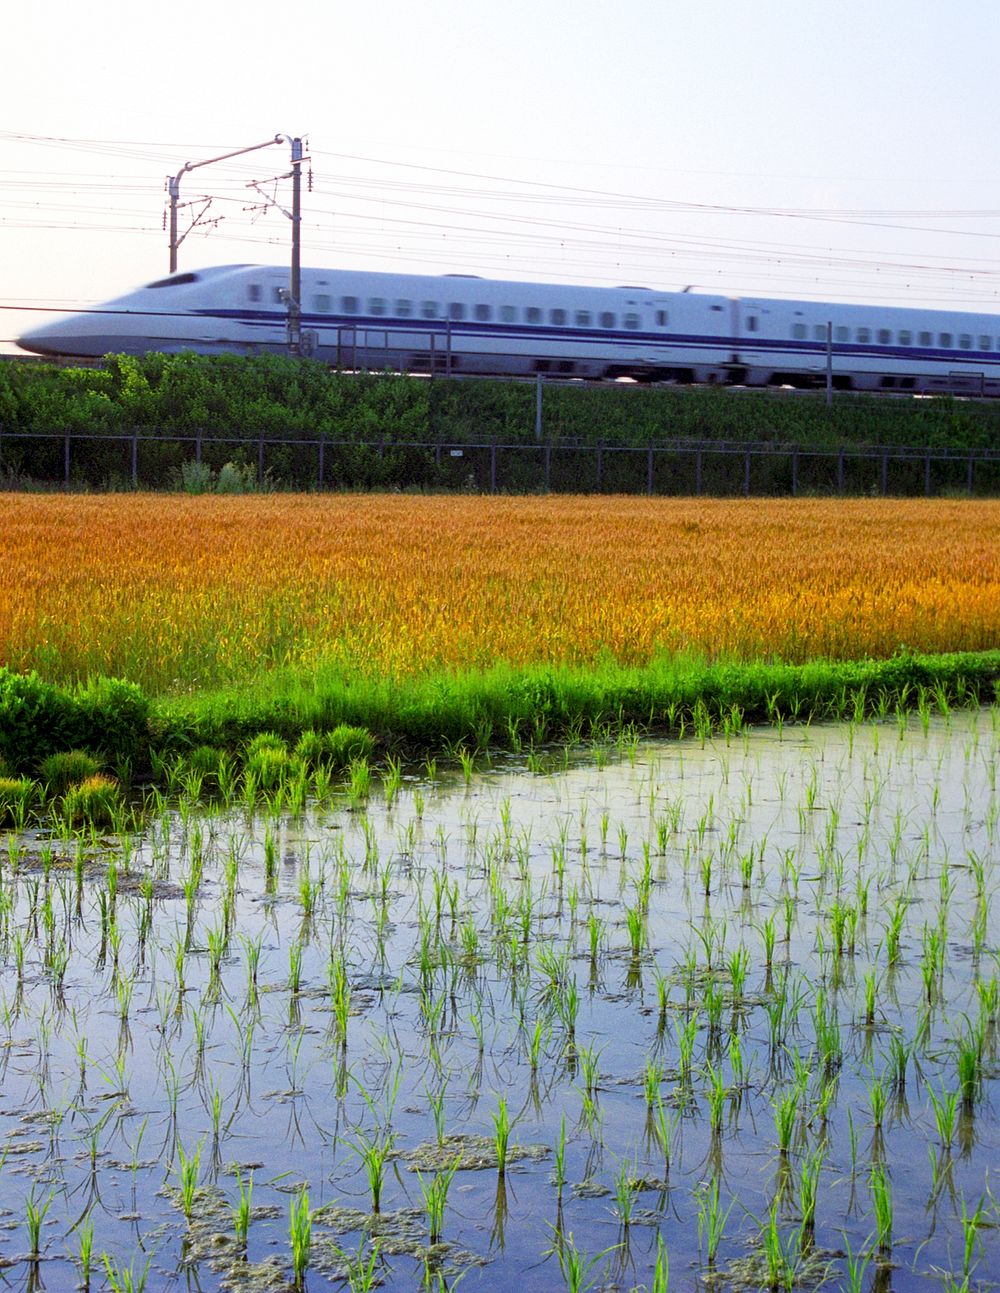 Bullet train passing by a rice paddy in Japan